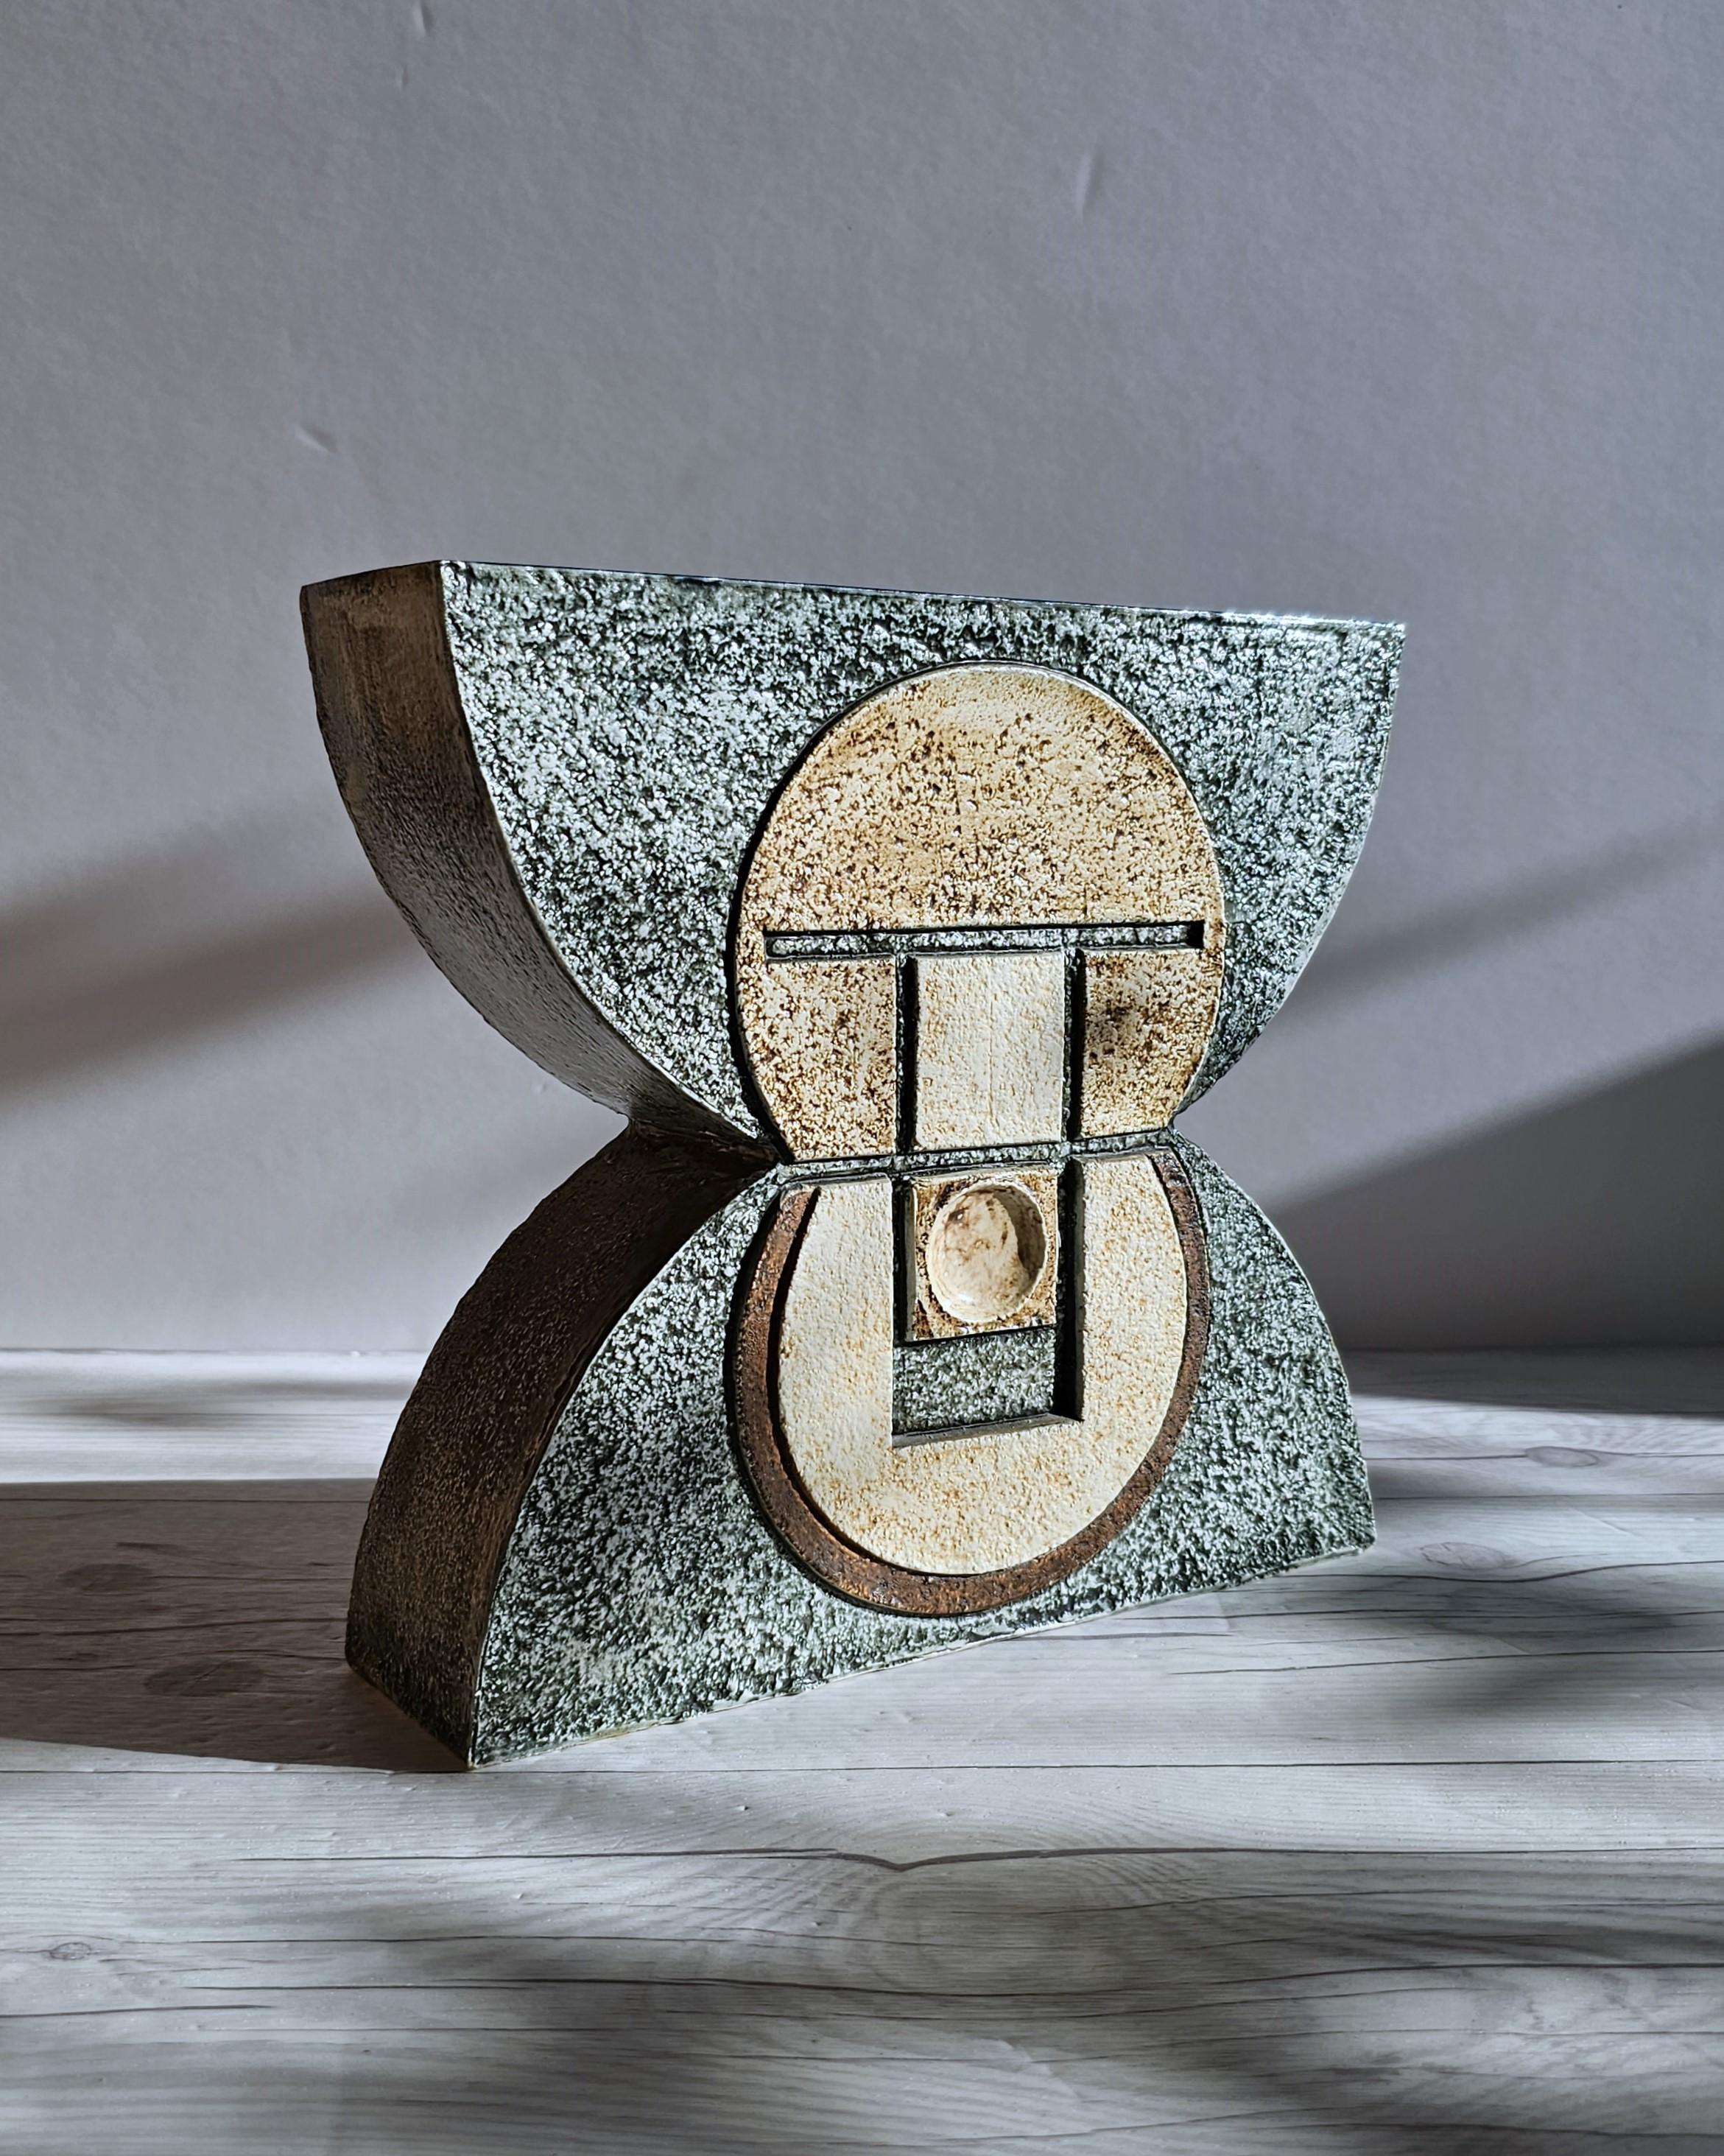 This stunning work iconic to Troika Studio Pottery (est. 1962 cse. 1983) called the 'Anvil', brings with it the earthy vibes of British Cornish pottery and Modernist design influences. 

Beautifully Modern, the form, deeply incised Sgraffito decor,